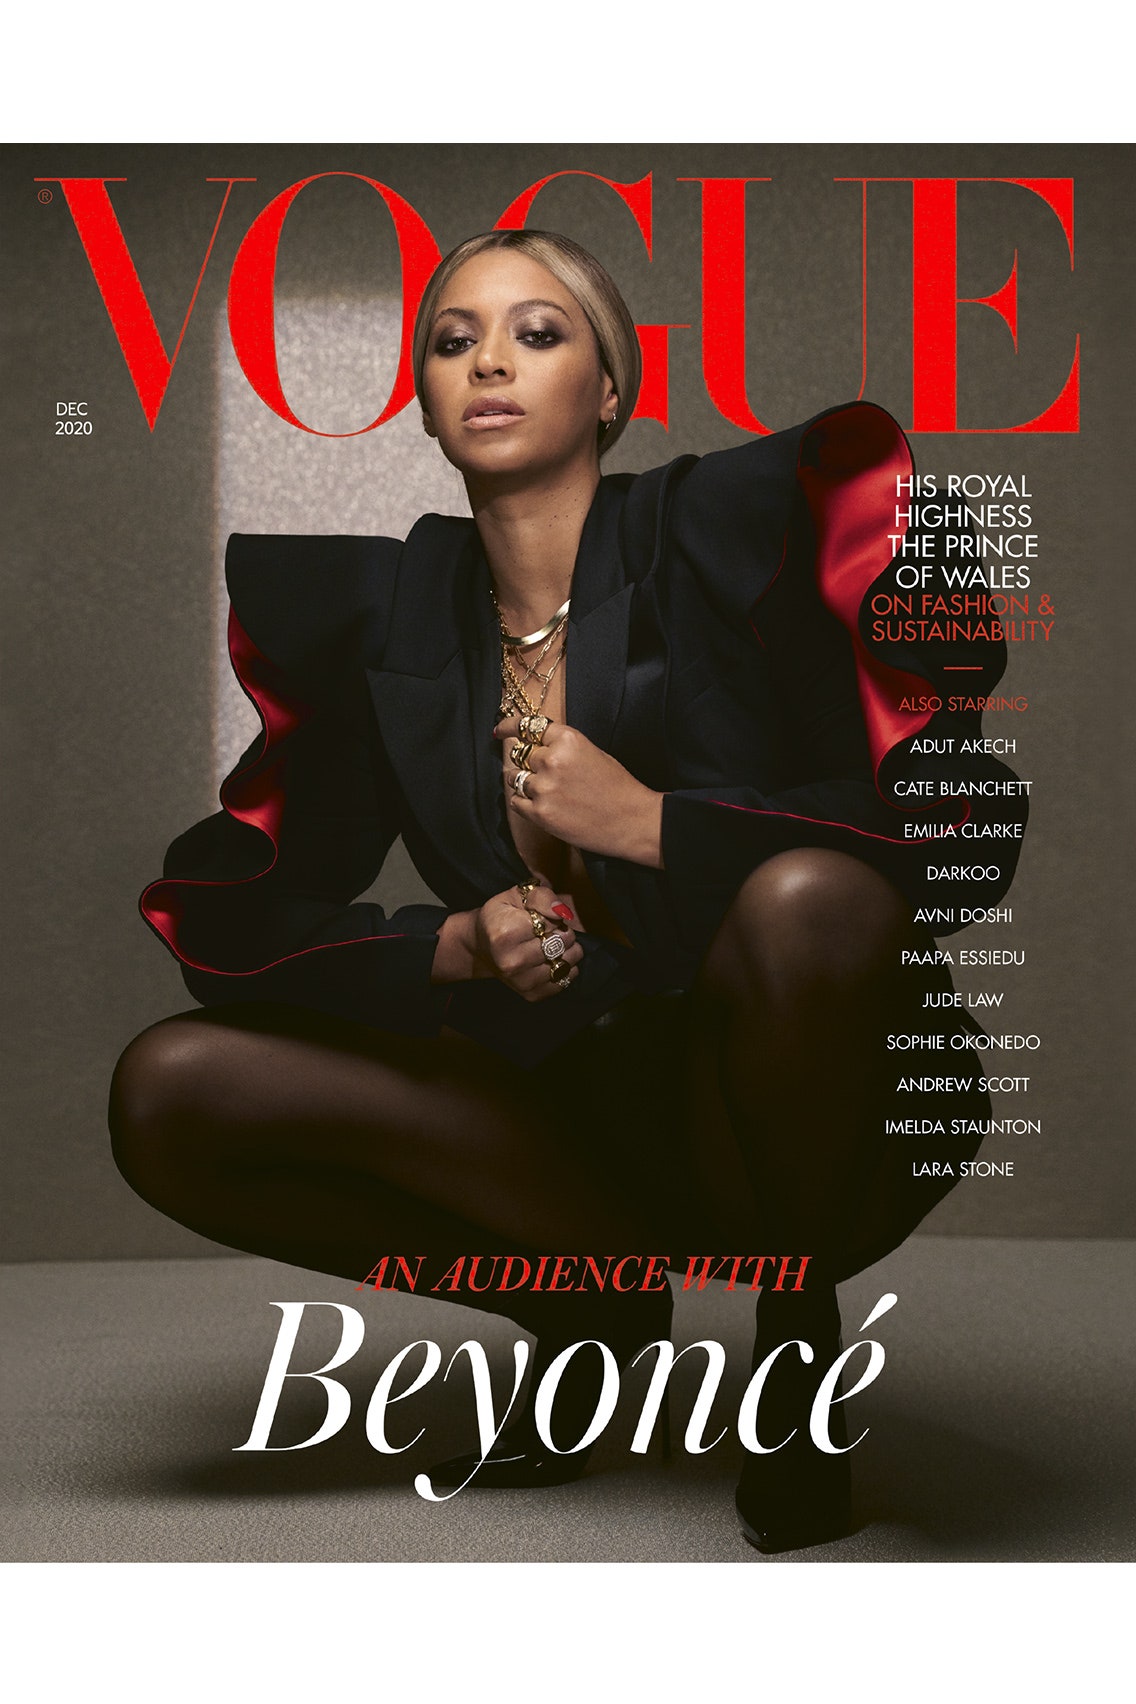 Beyonce Covers British Vogue December Edition - Women of Rubies